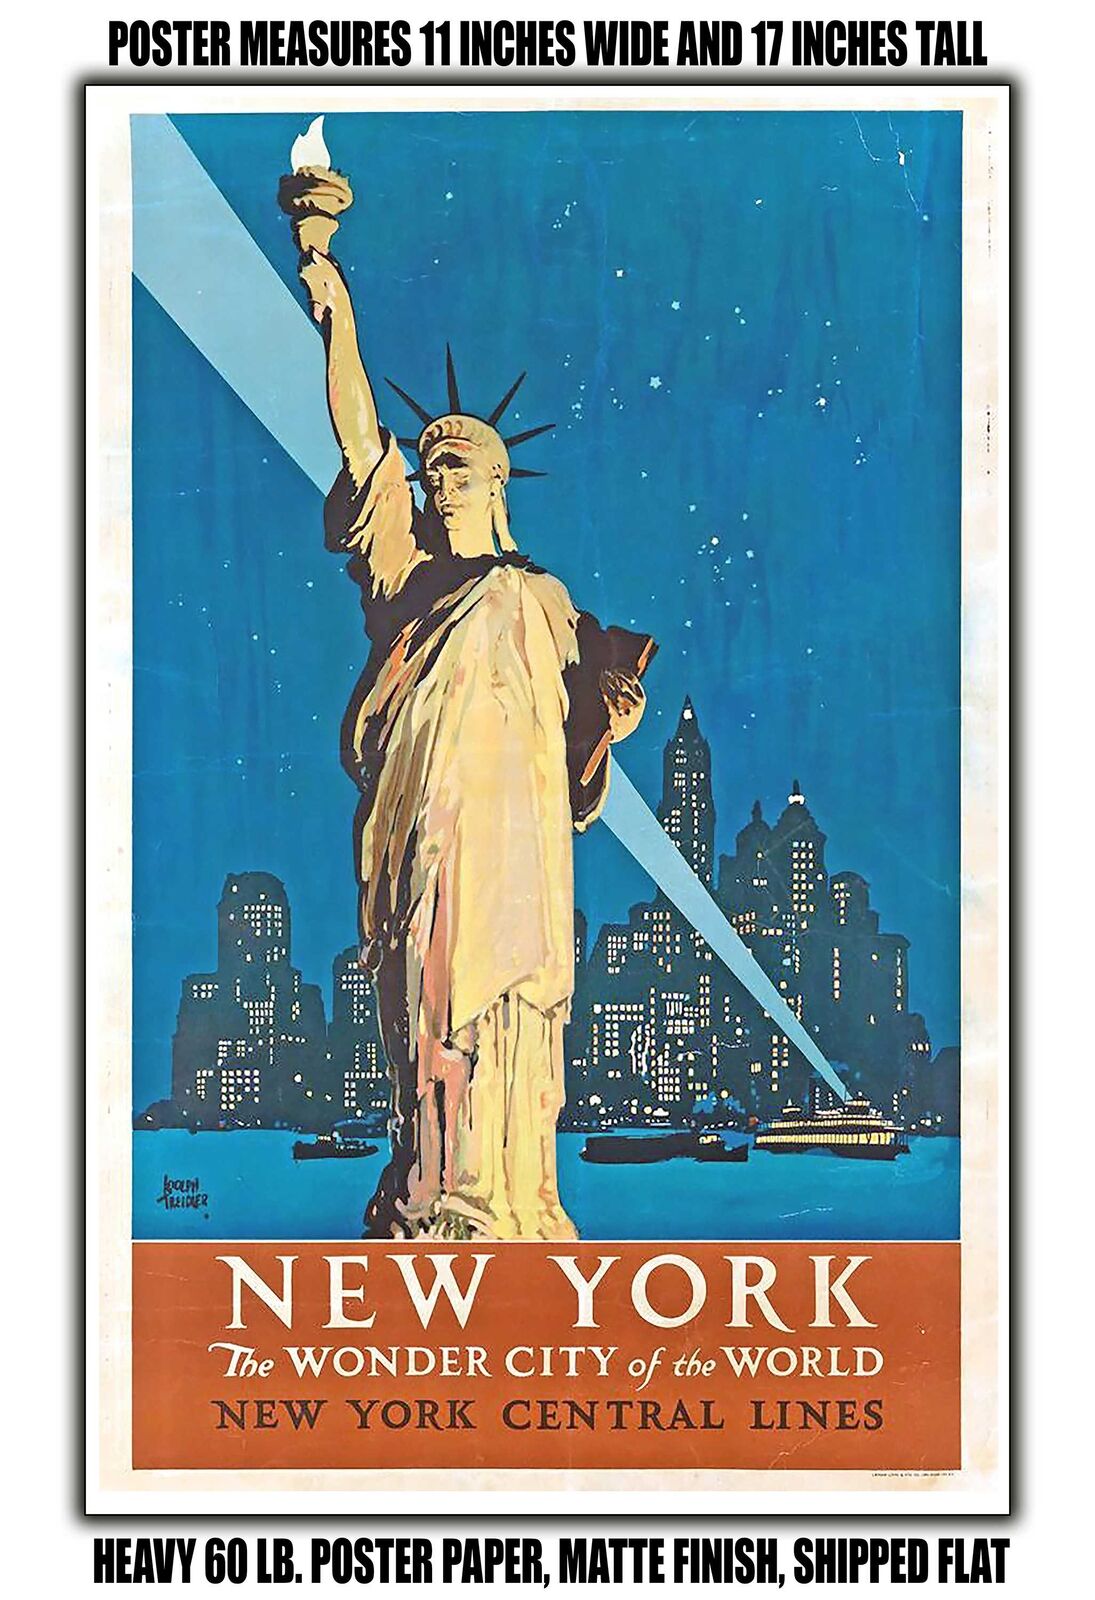 11x17 POSTER - 1927 New York the Wonder City of the World New York Central Lines